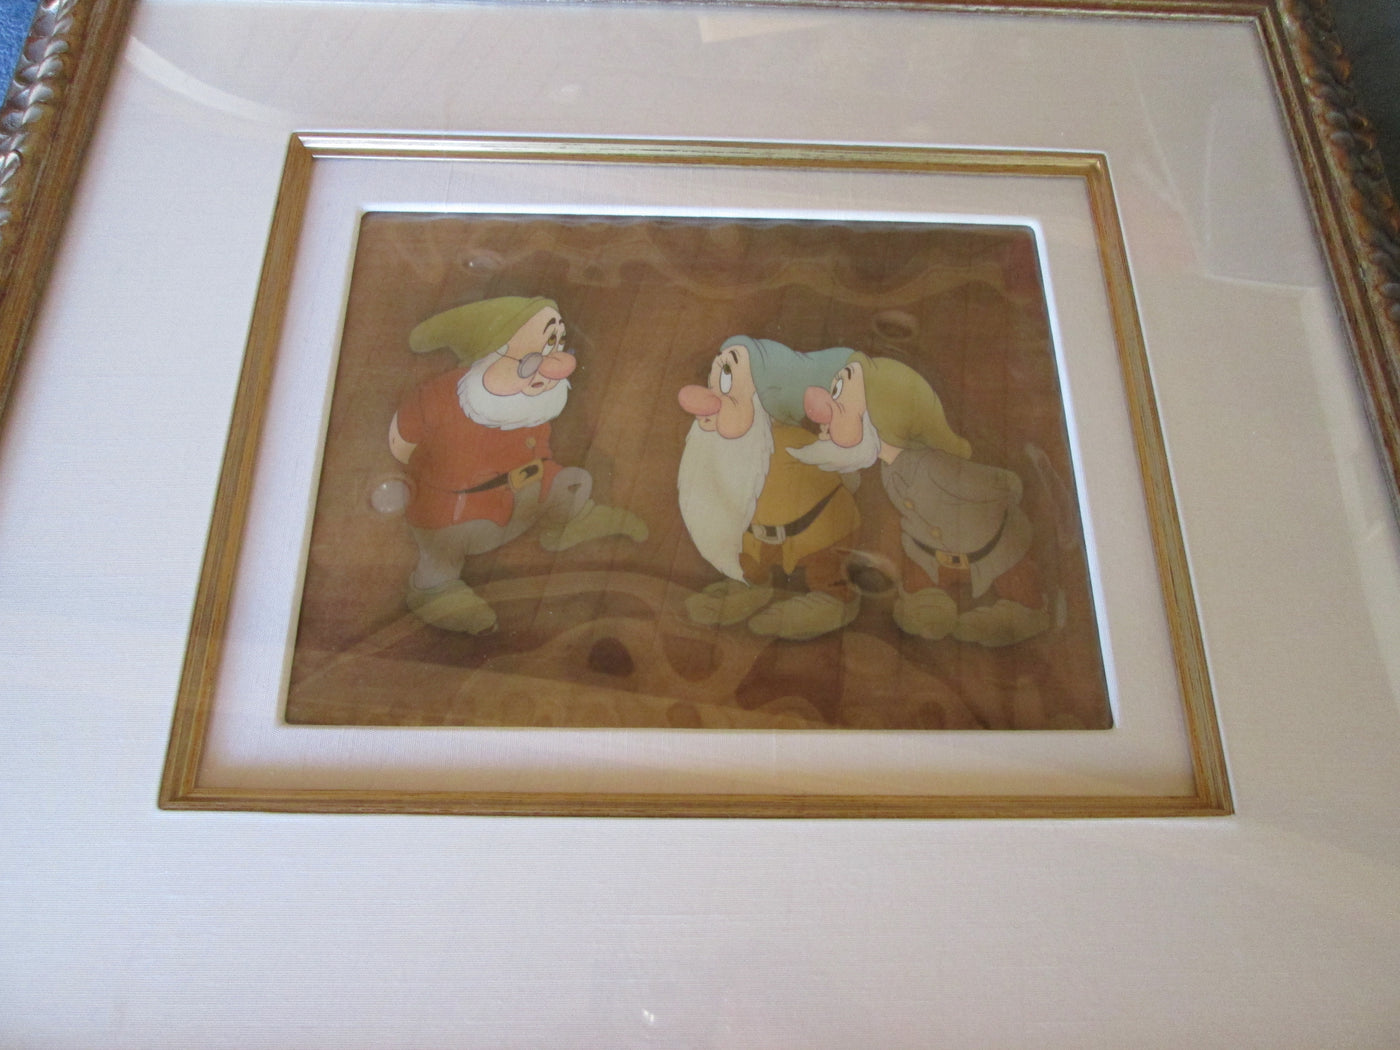 Original Walt Disney Production Cel on Courvoisier Background from Snow White and the Seven Dwarfs featuring Doc, Bashful and Sneezy